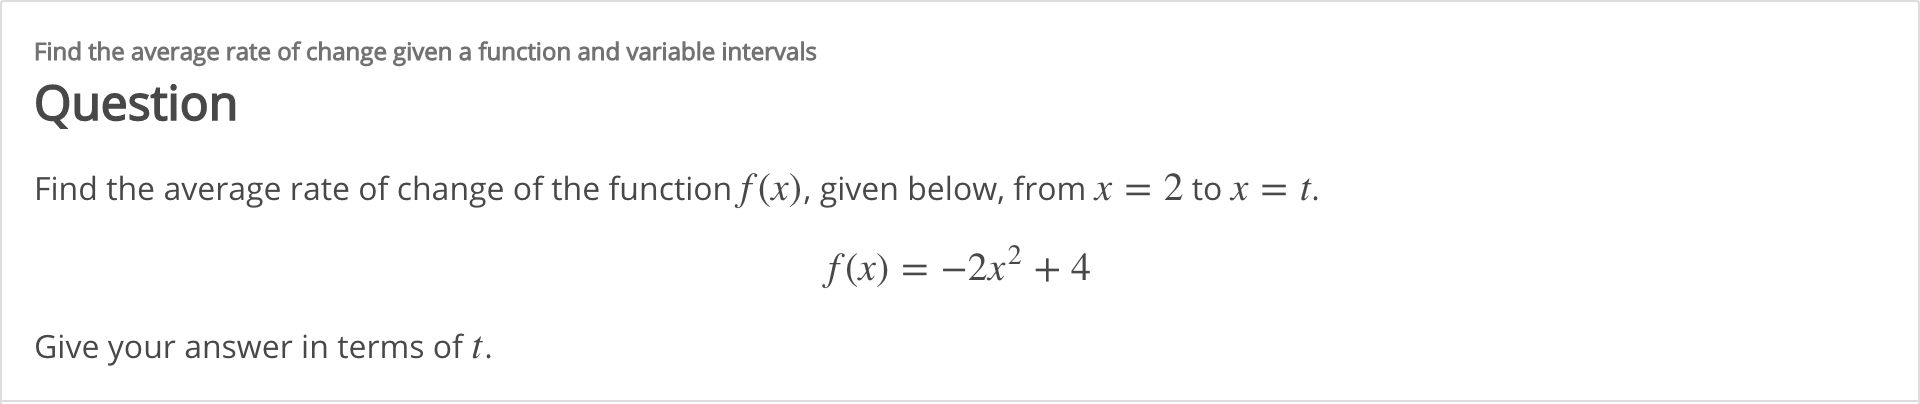 Find the average rate of change given a function and variable intervals
Question
Find the average rate of change of the function f (x), given below, from x = 2 to x = t.
f (x) = –2x² + 4
Give your answer in terms of t.
